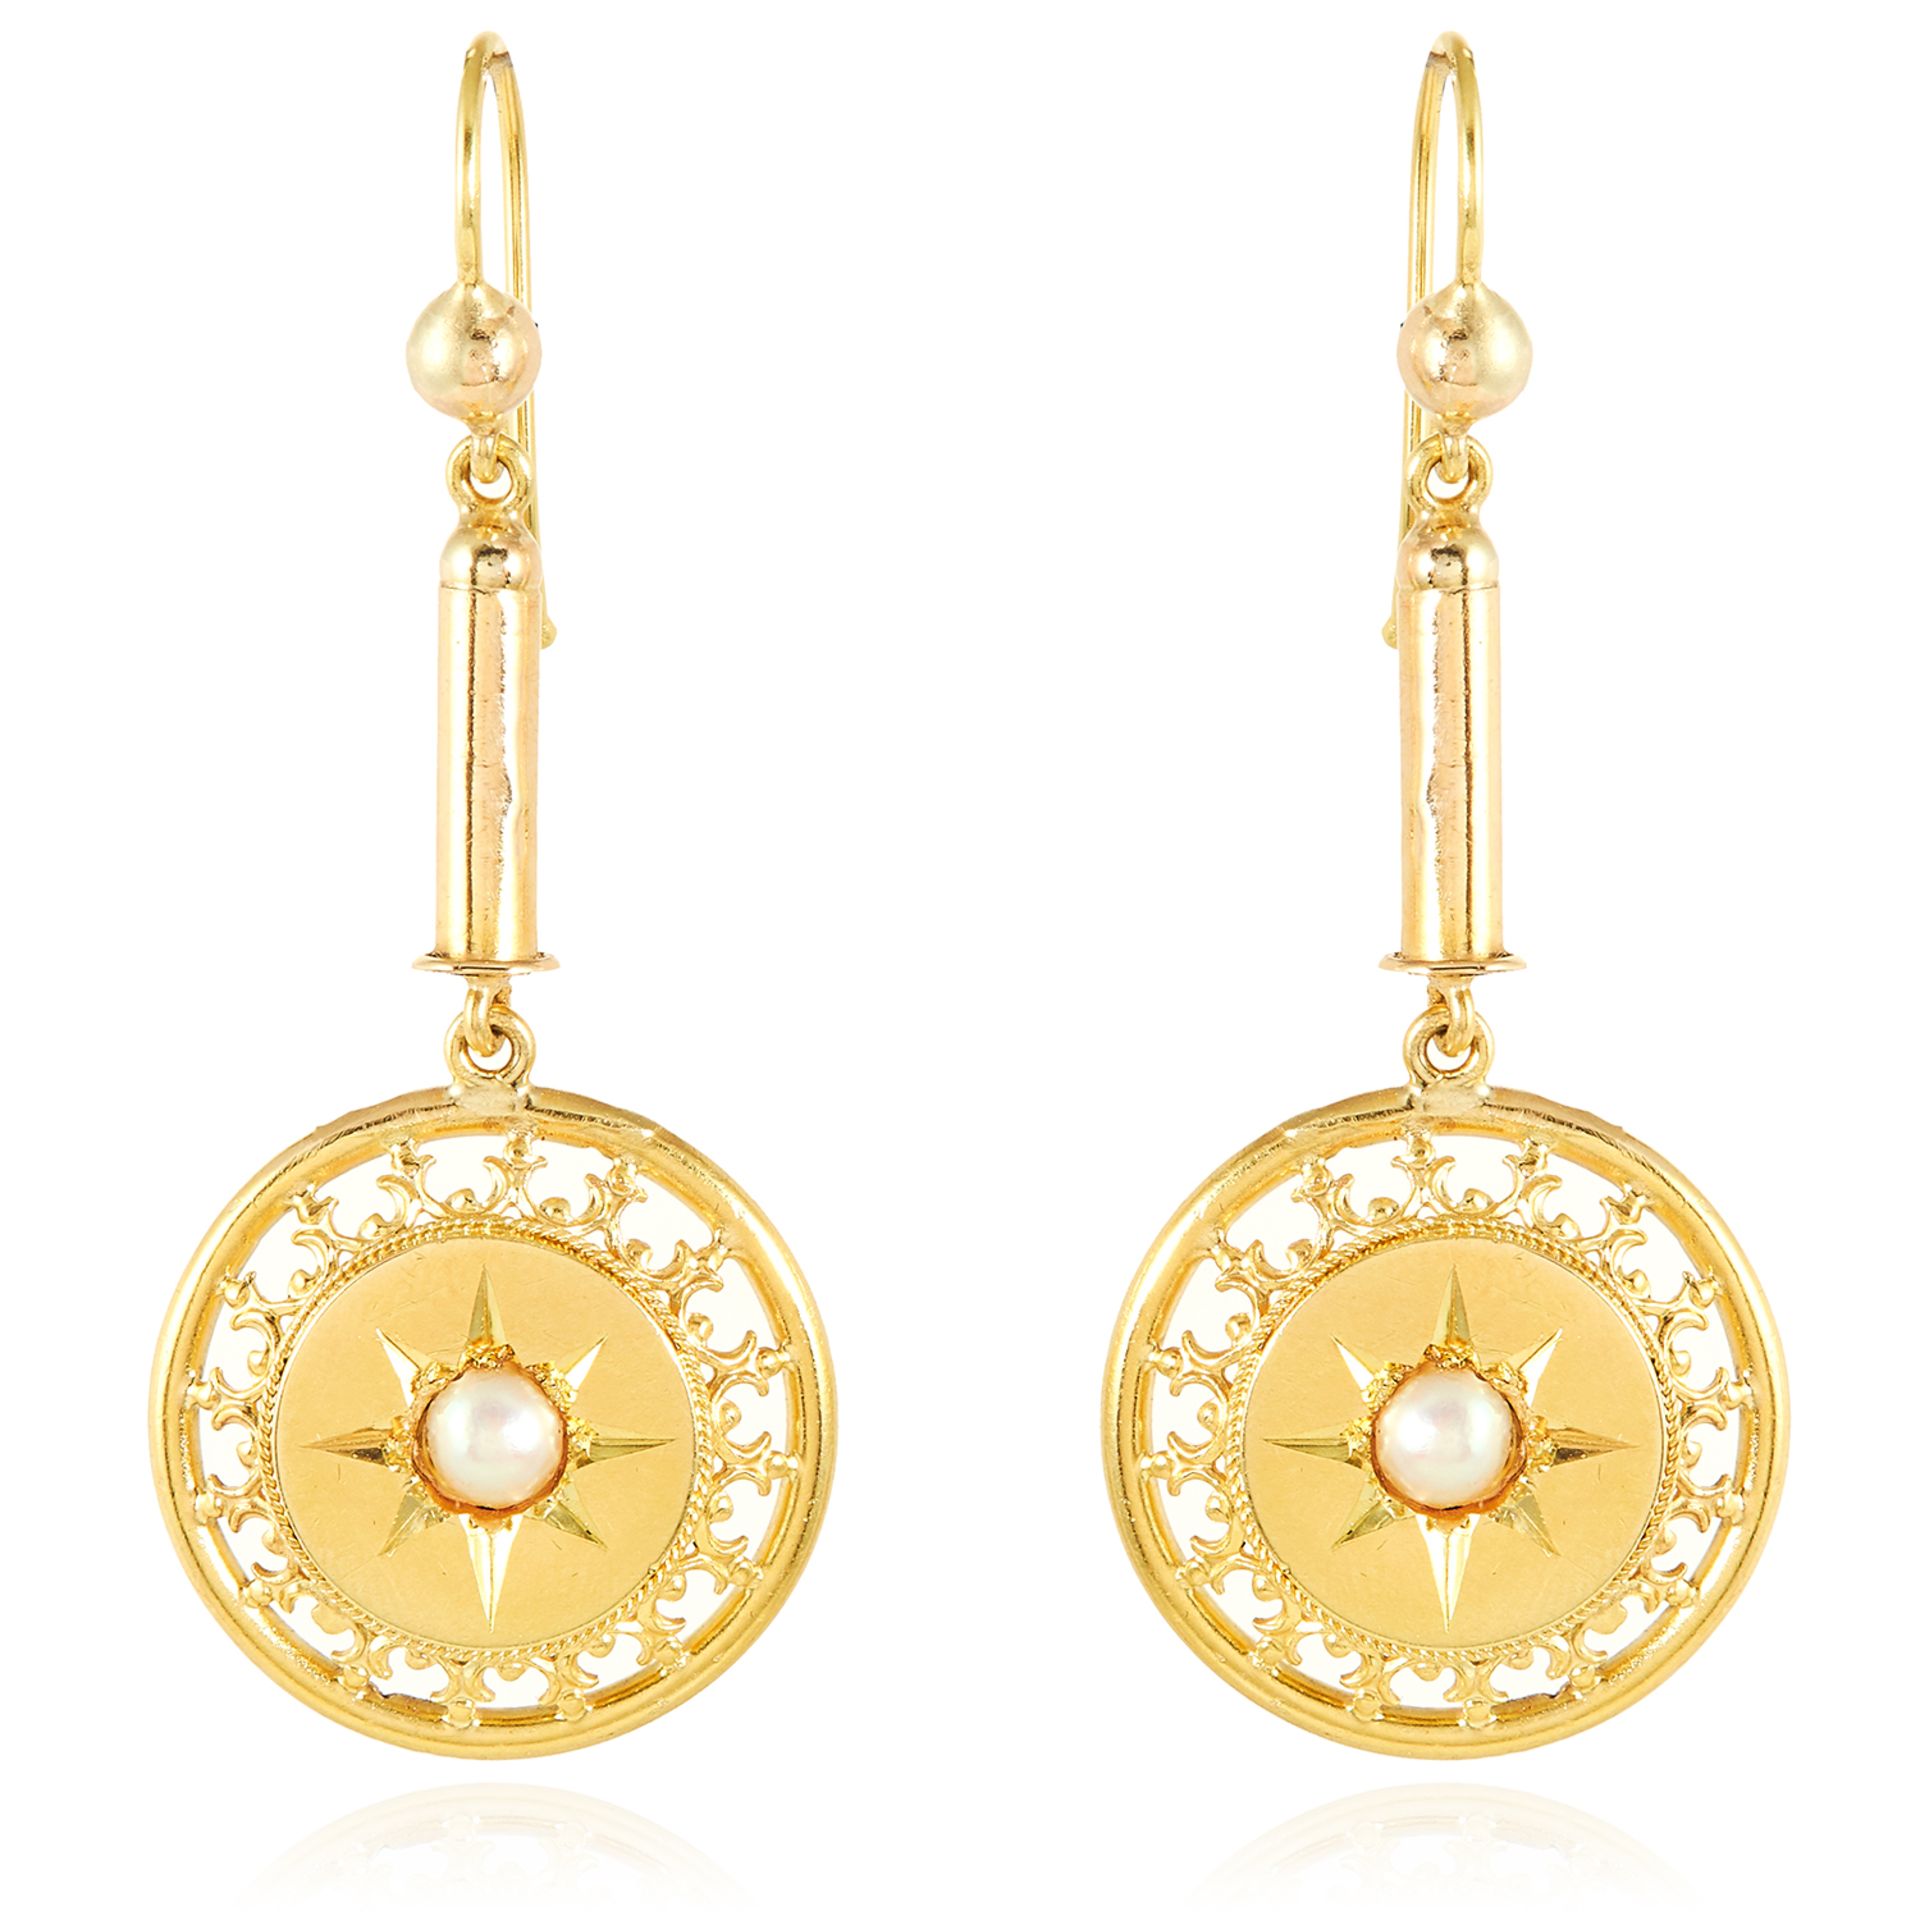 A PAIR OF ANTIQUE PEARL DROP EARRINGS, 19TH CENTURY in high carat yellow gold, each suspending a